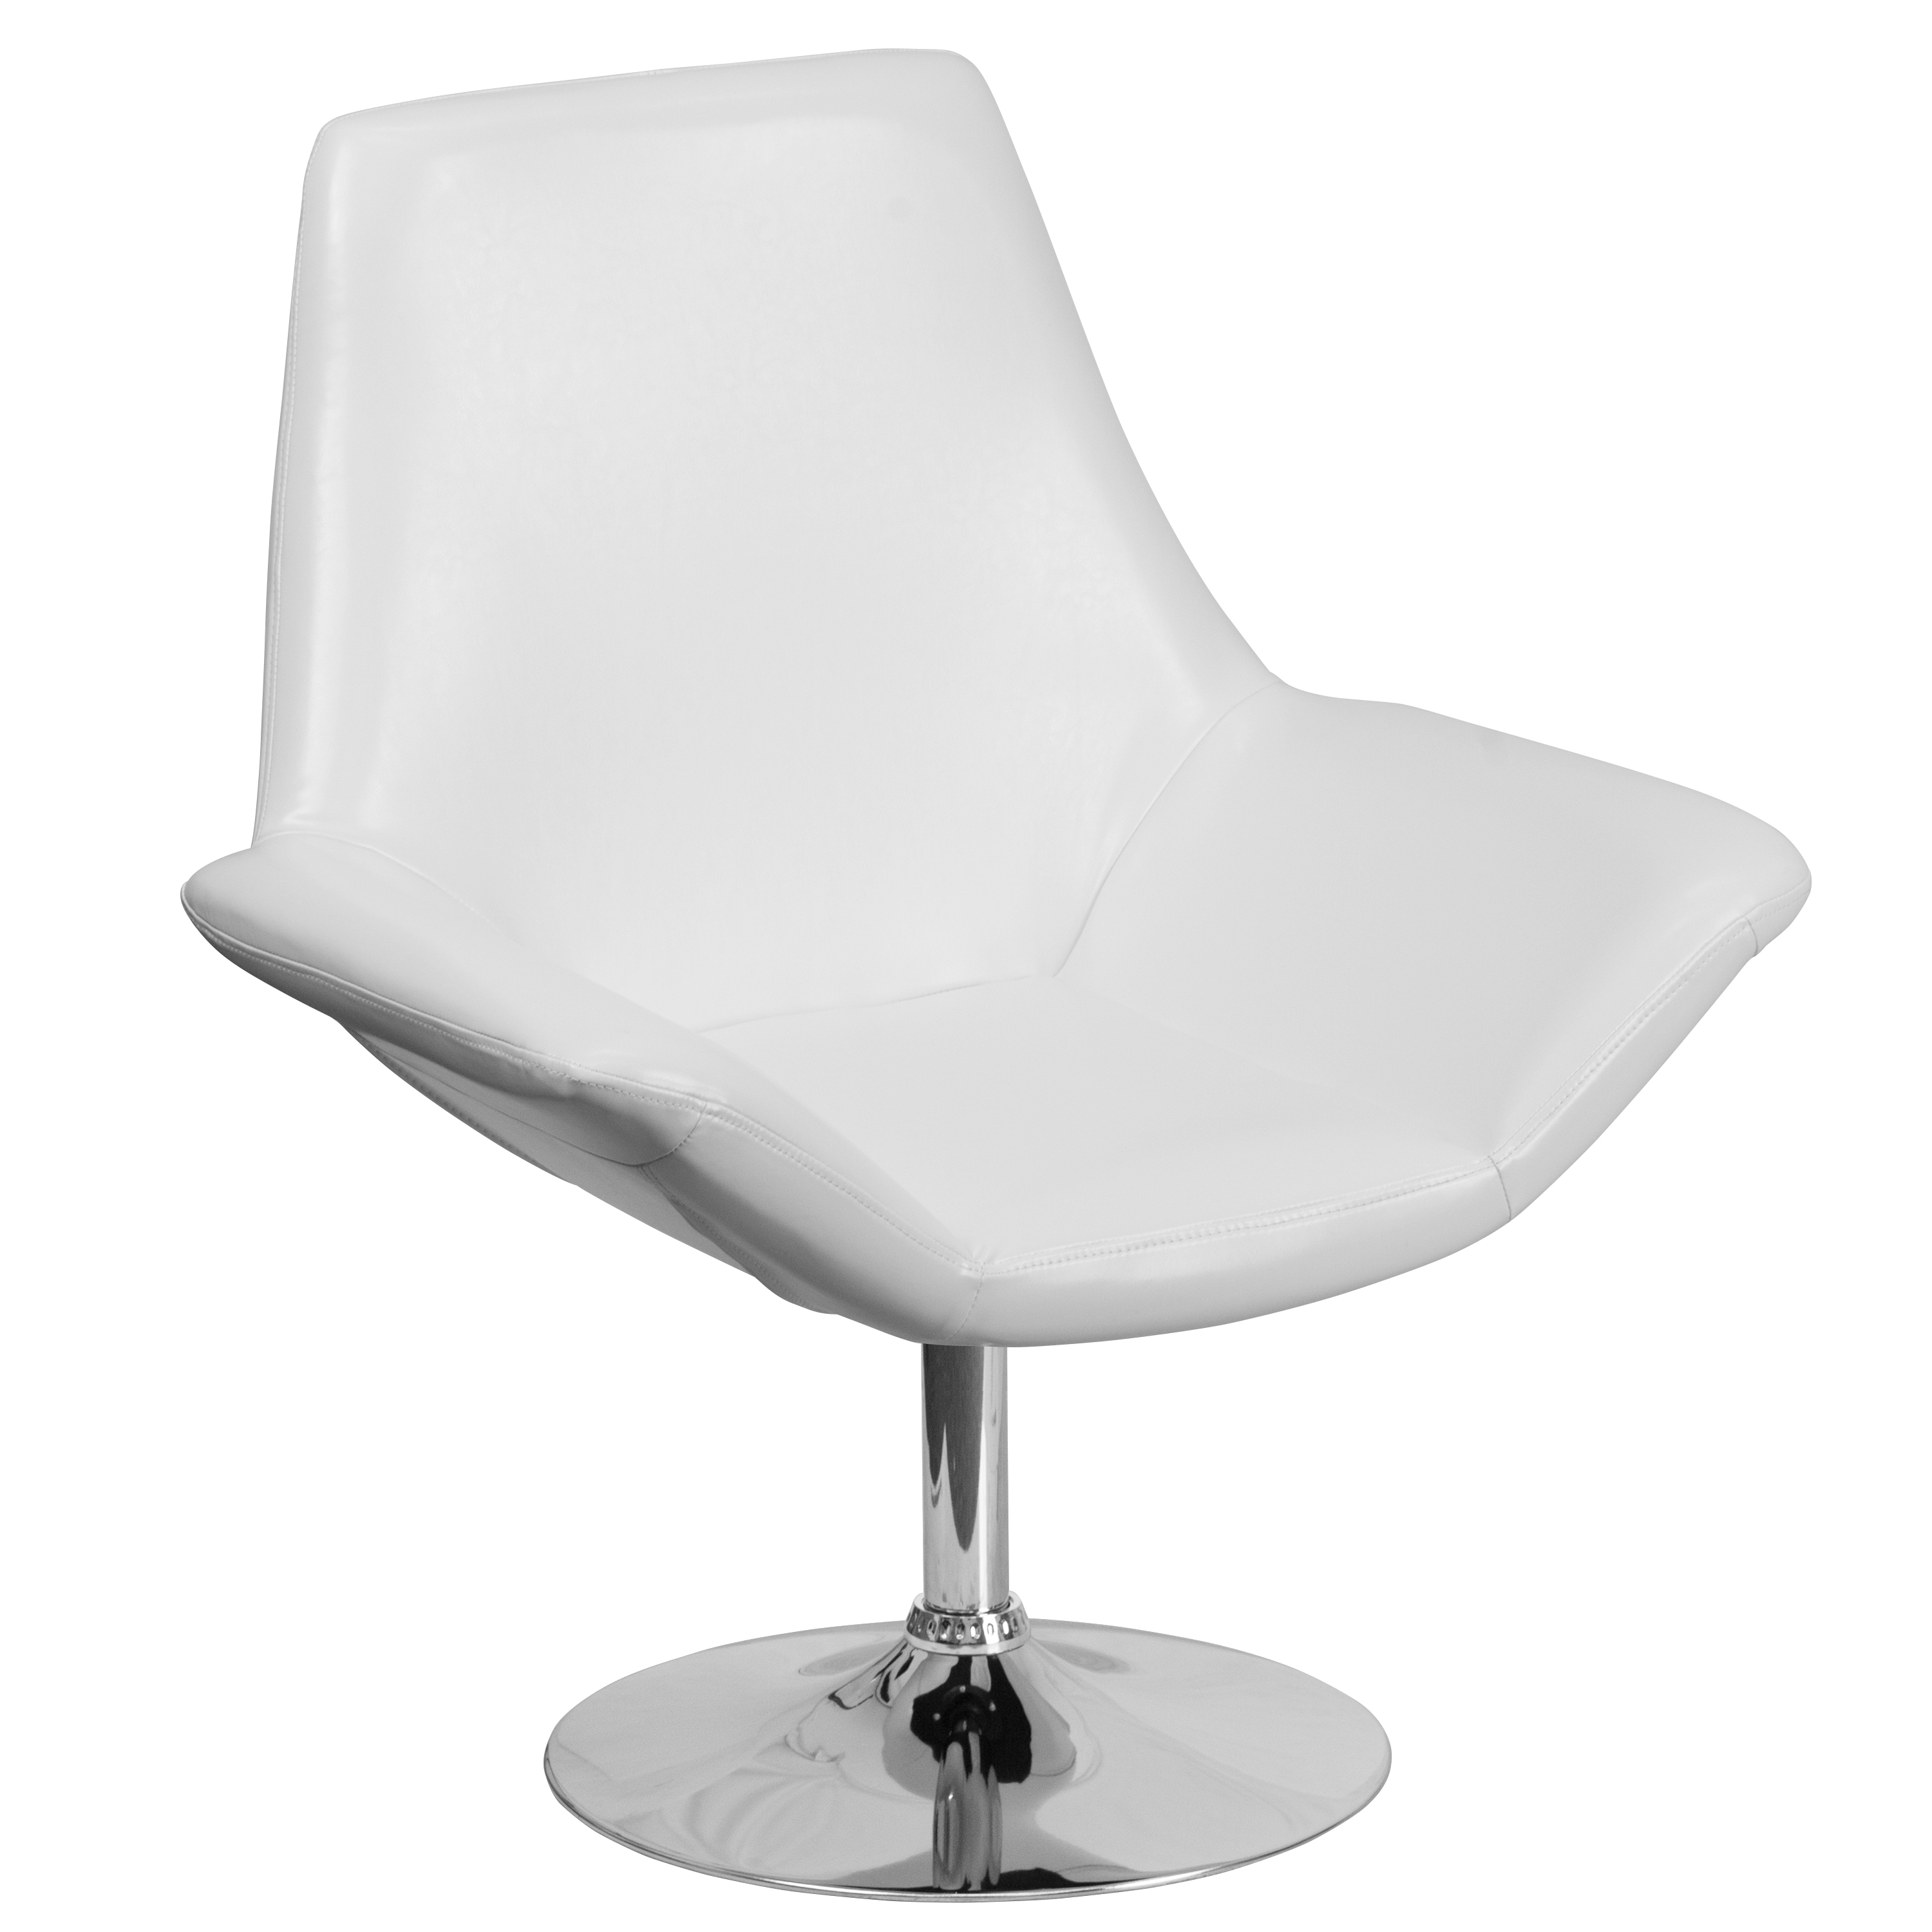 Flash Furniture HERCULES Sabrina Series White LeatherSoft Side Reception Chair - image 2 of 12